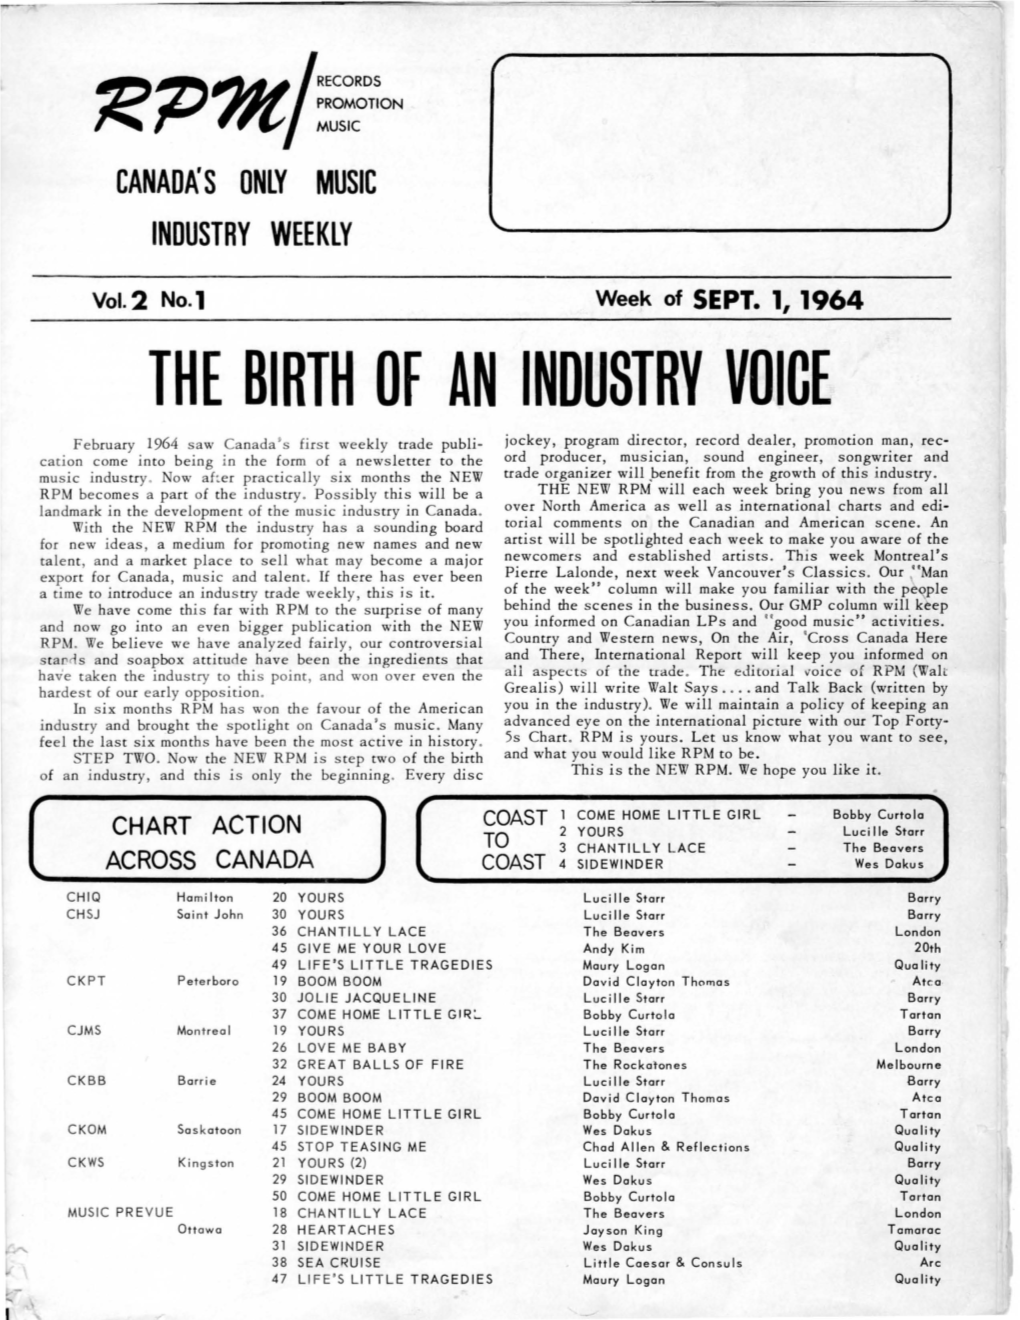 The Birth of an Industry Voice